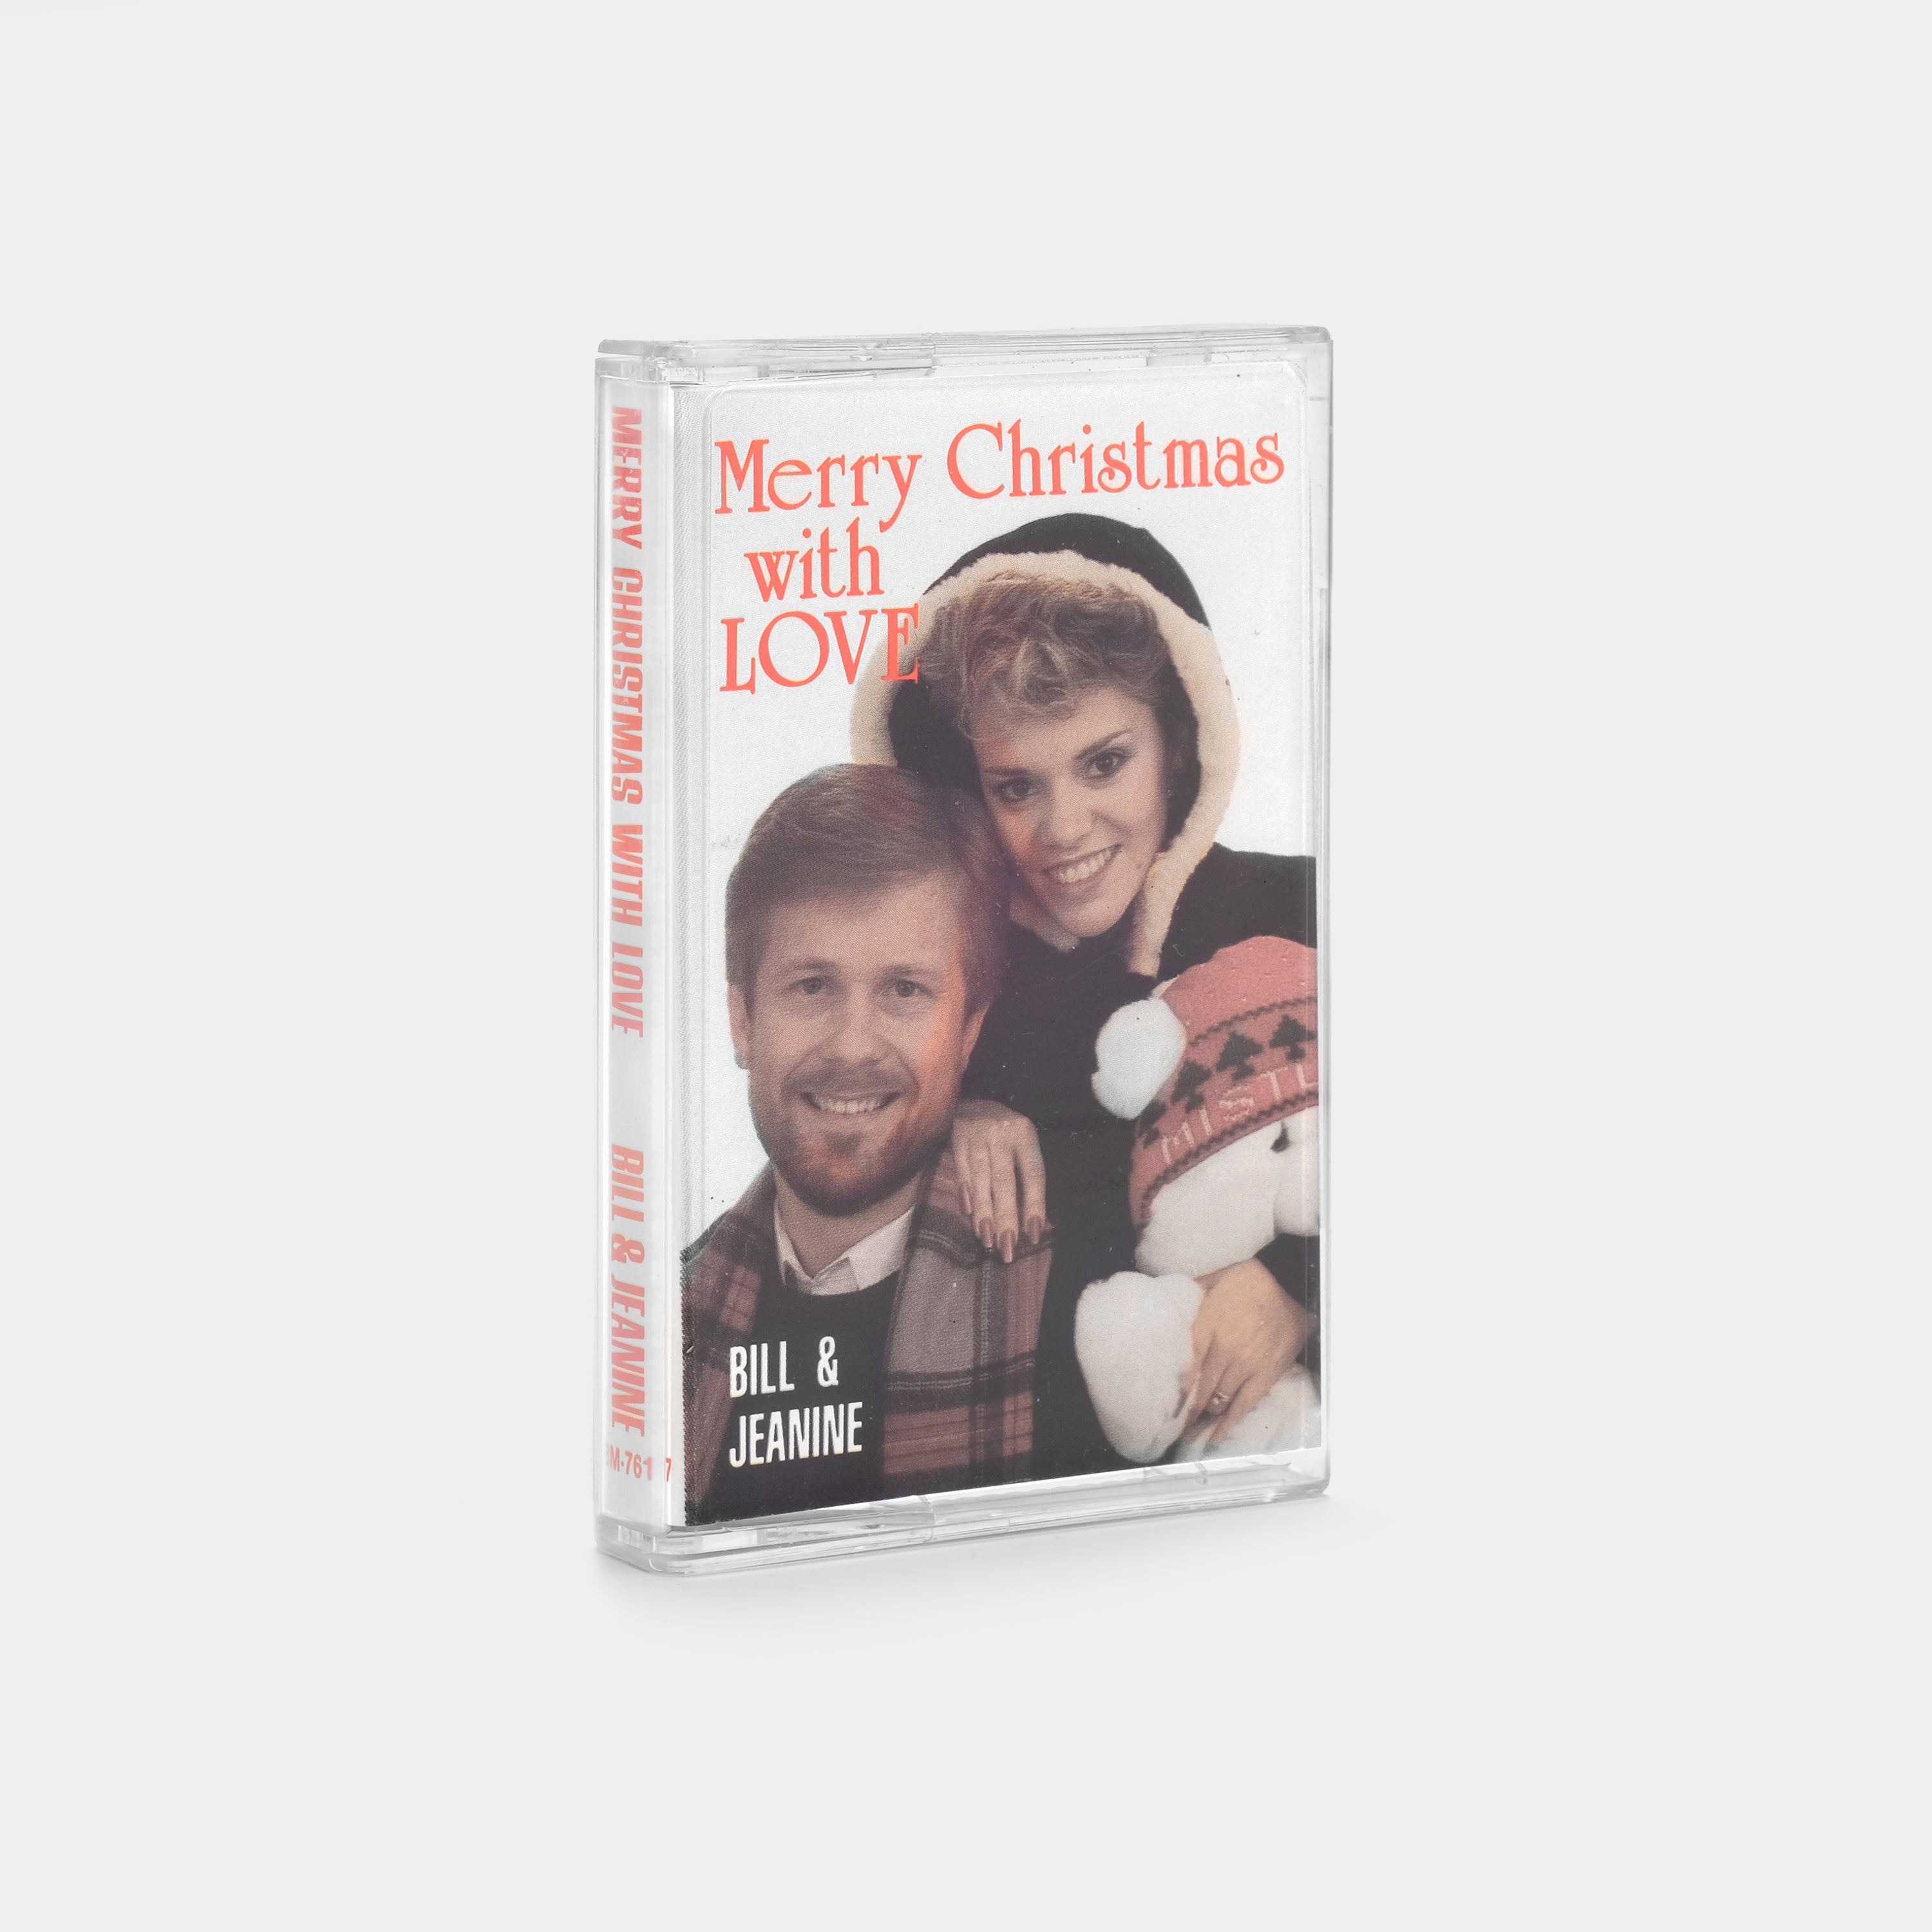 Bill & Jeanine - Merry Christmas With Love Cassette Tape